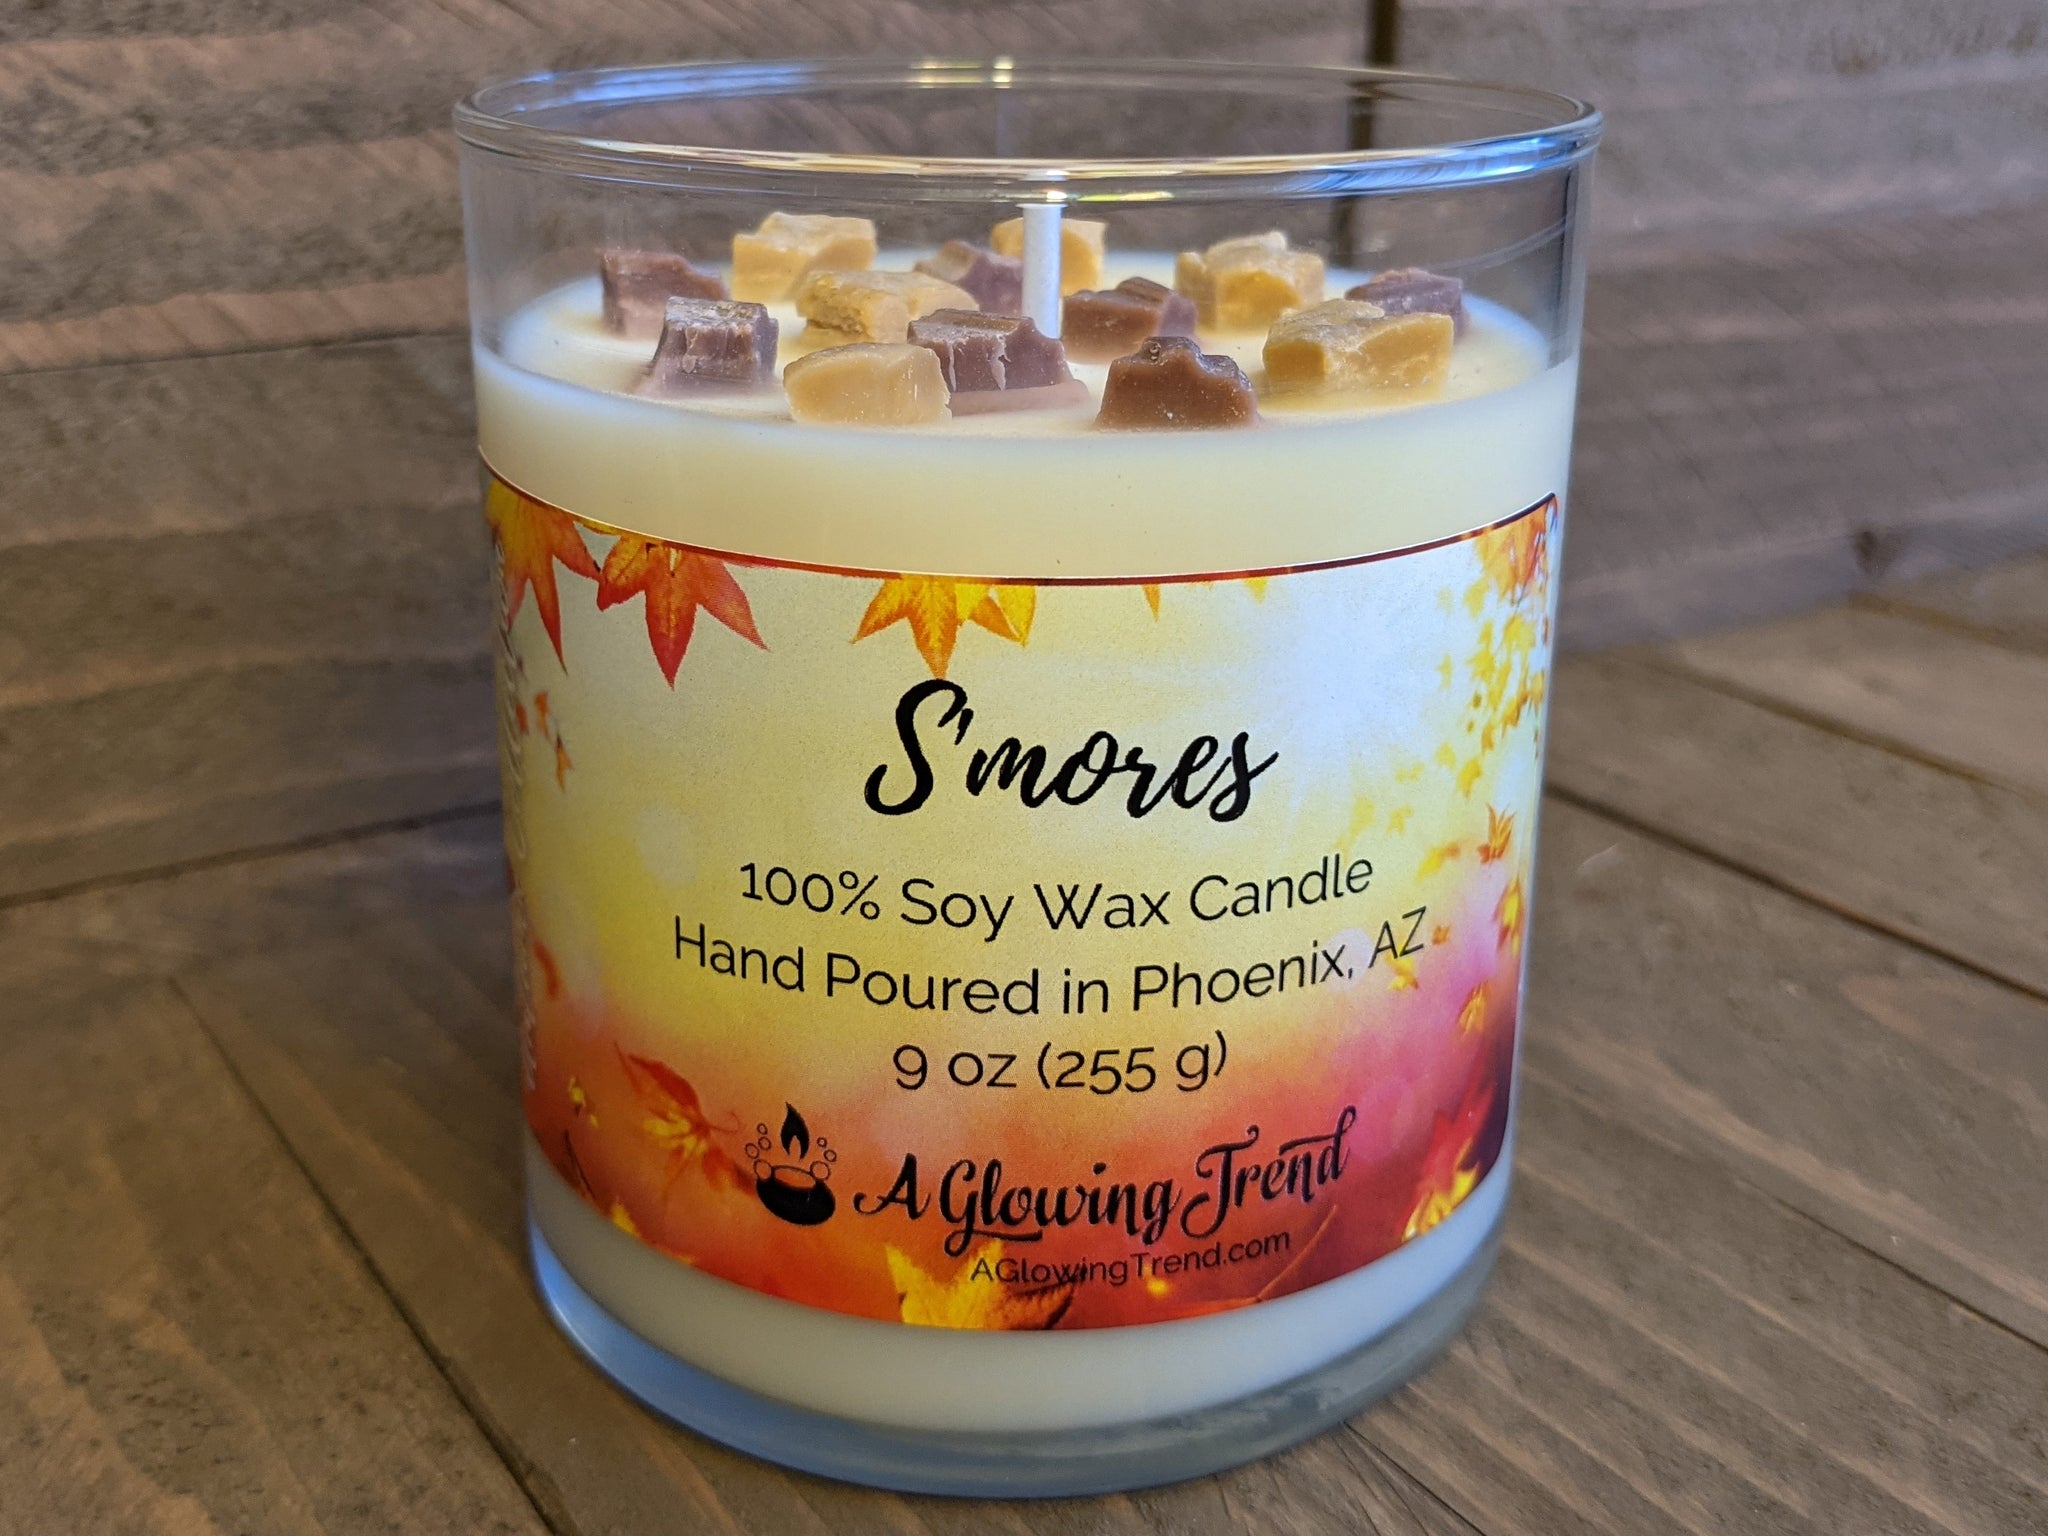 A 9 oz glass tumbler containing a white S'mores scented soy candle topped with wax graham cracker and chocolate bits by A Glowing Trend.